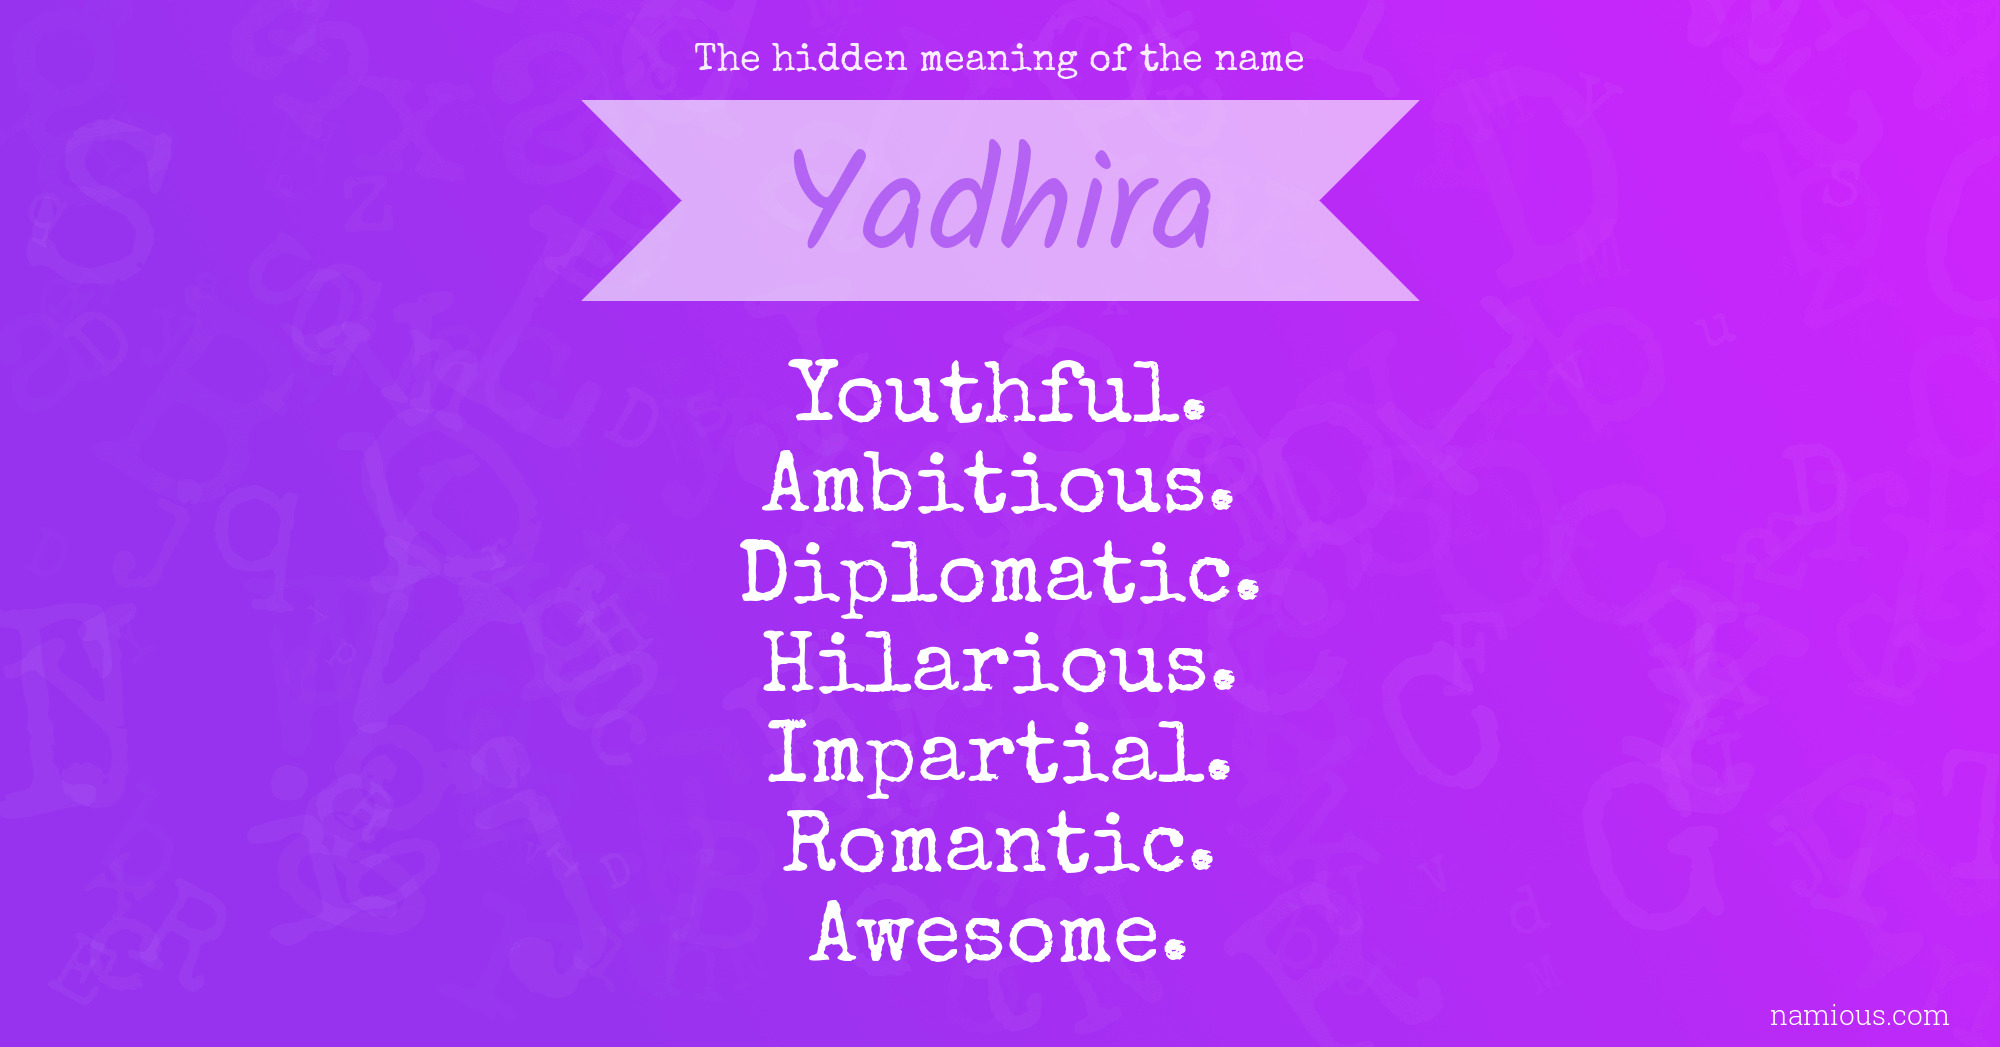 The hidden meaning of the name Yadhira